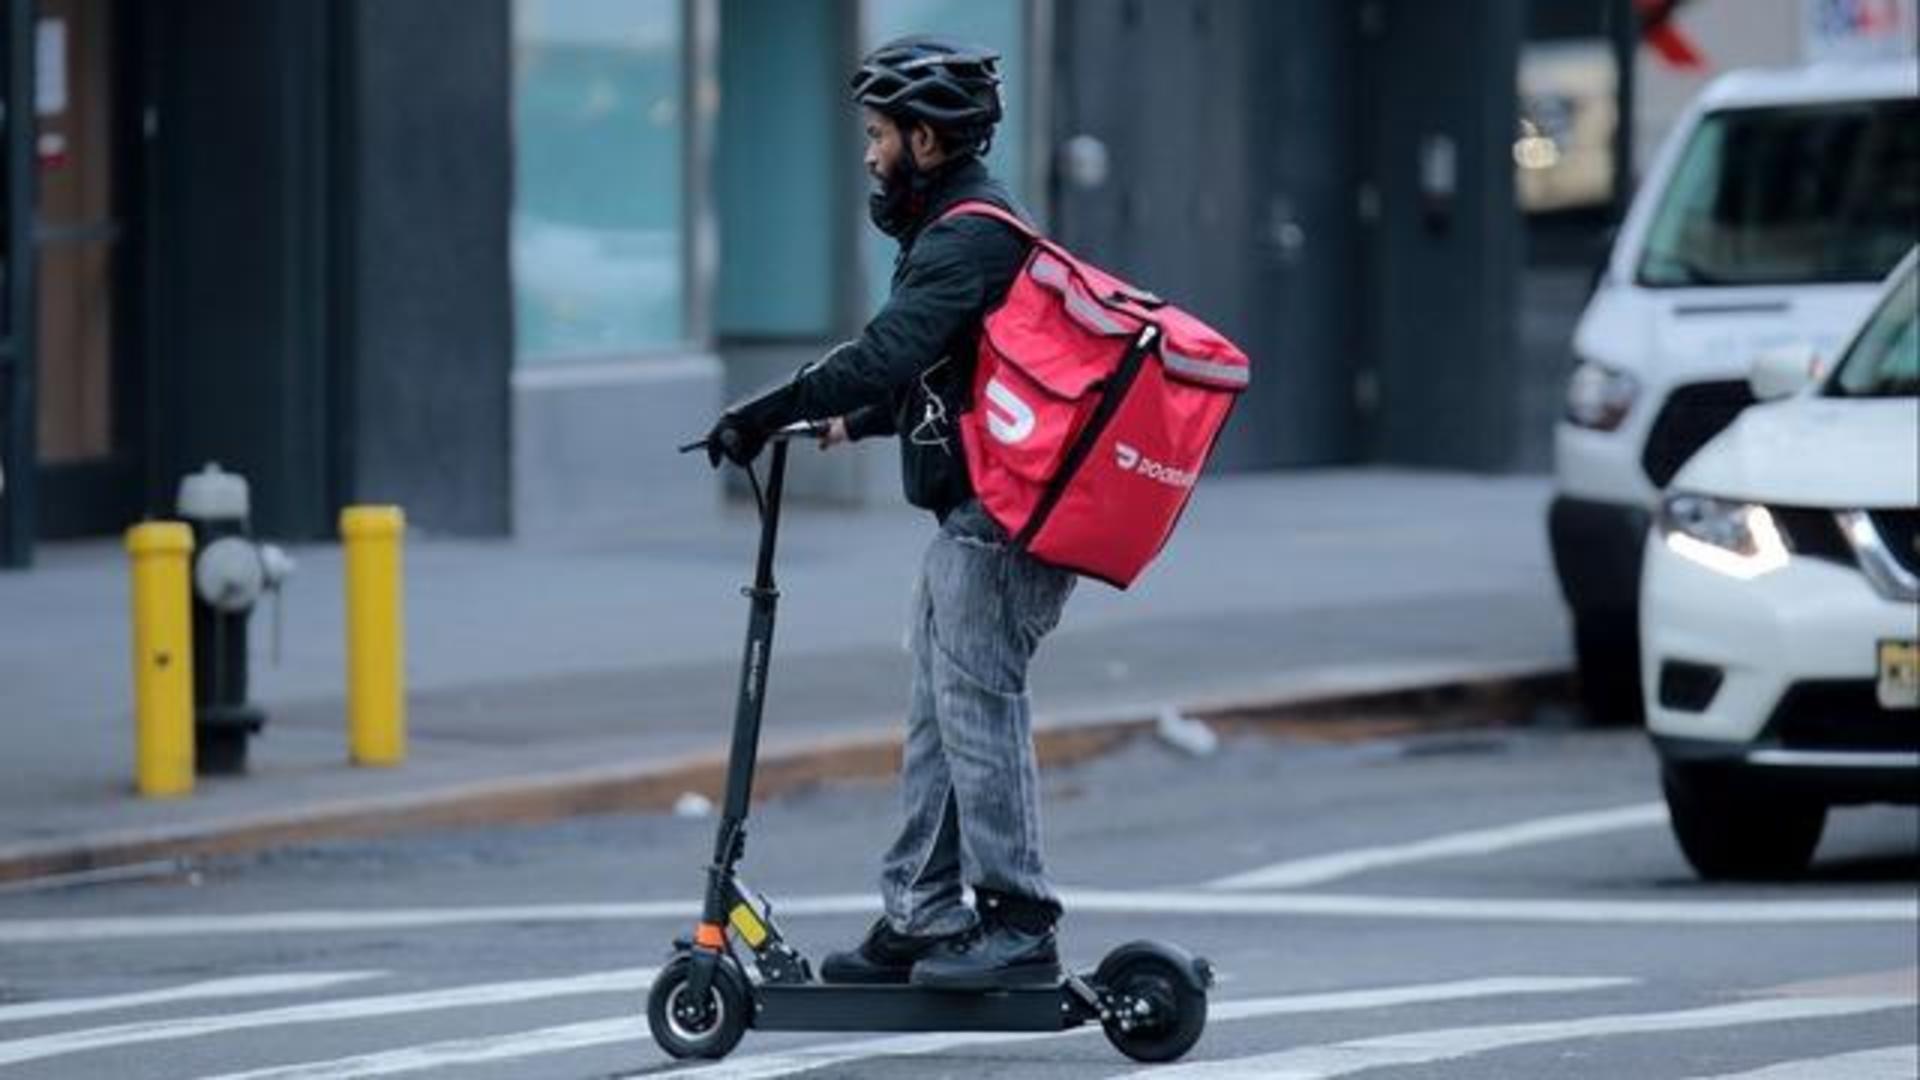 NYC more than doubling pay for food delivery workers - CBS News